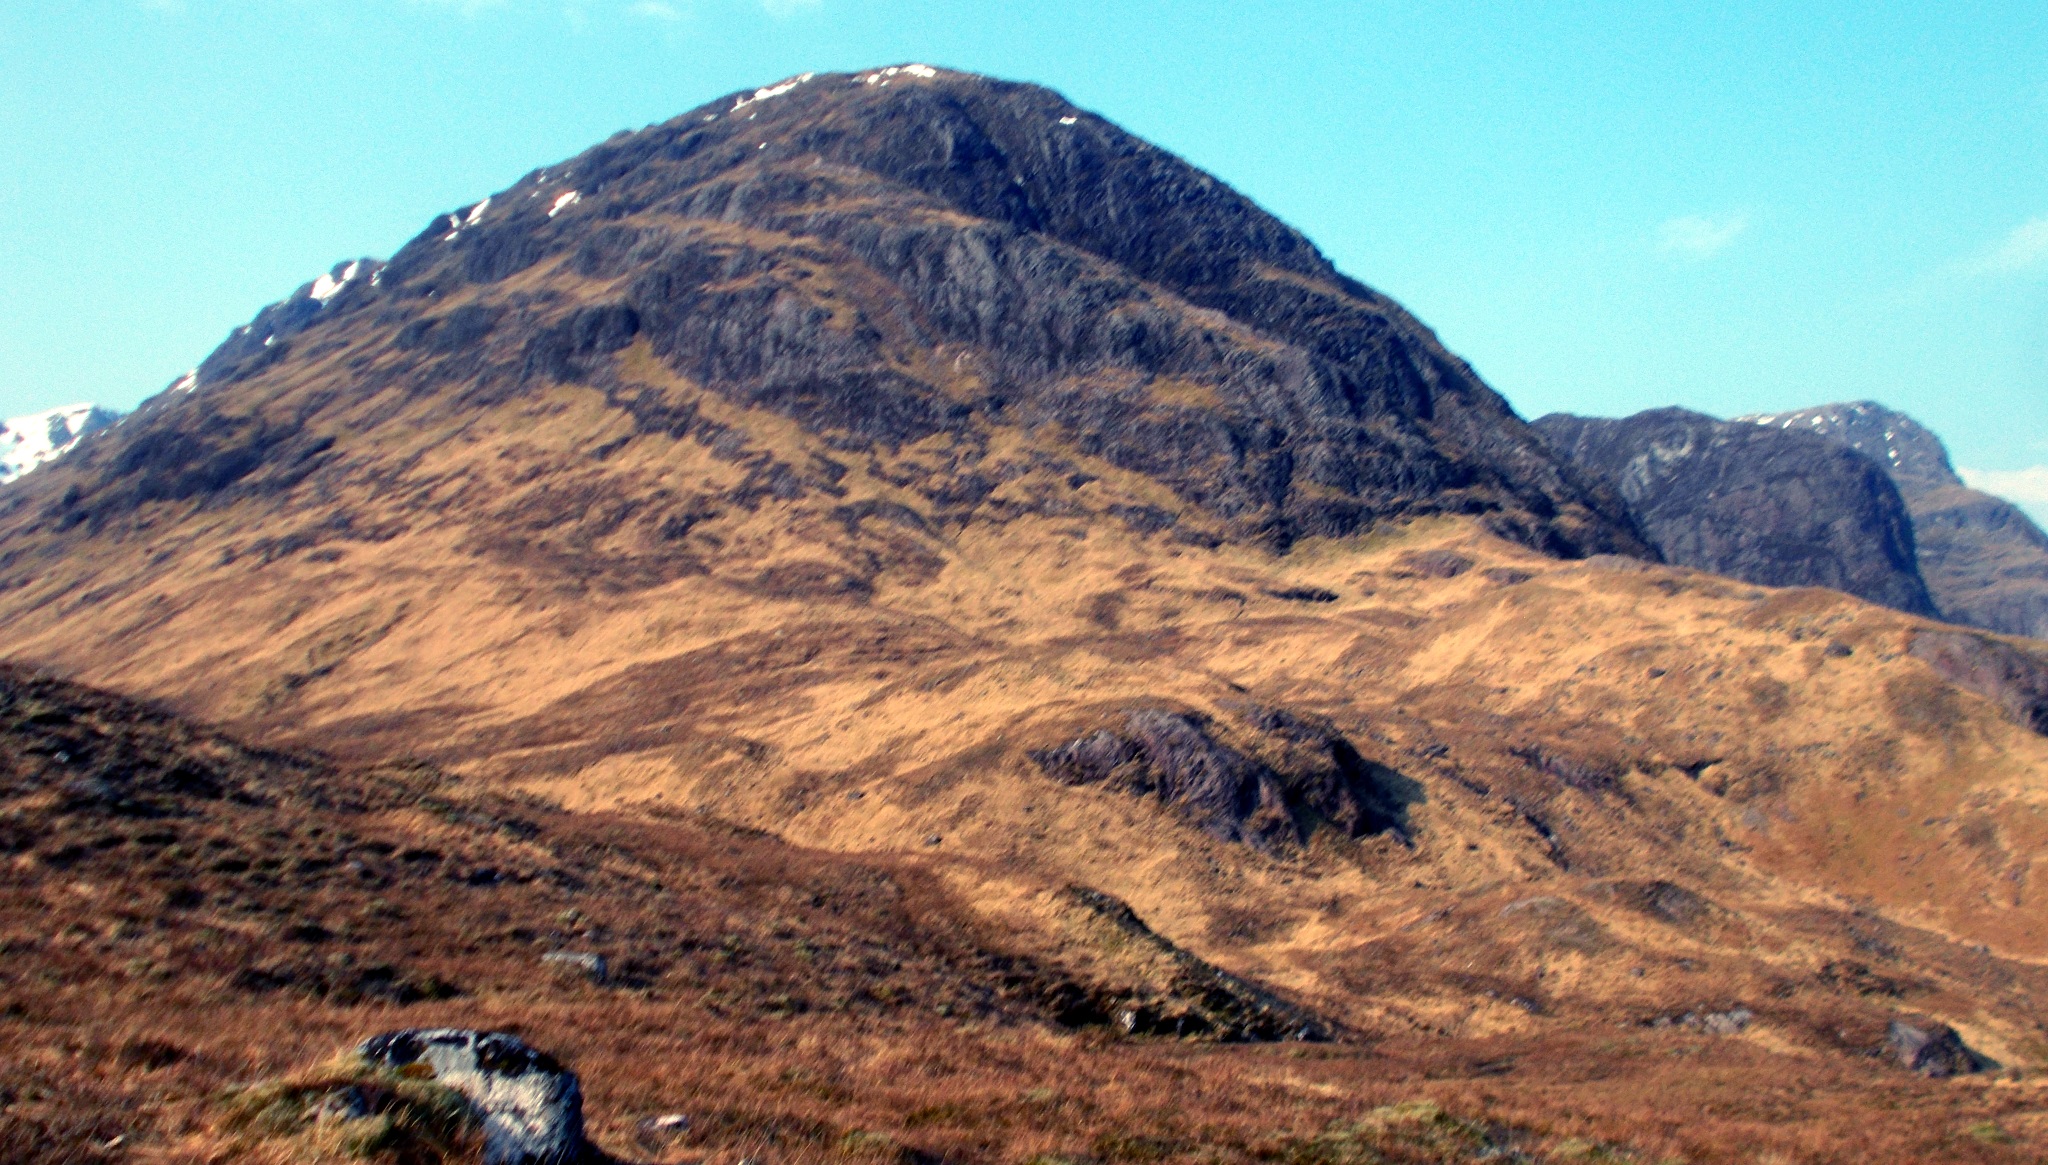 Beinn Fhada - the first of the Three Sisters of Glencoe